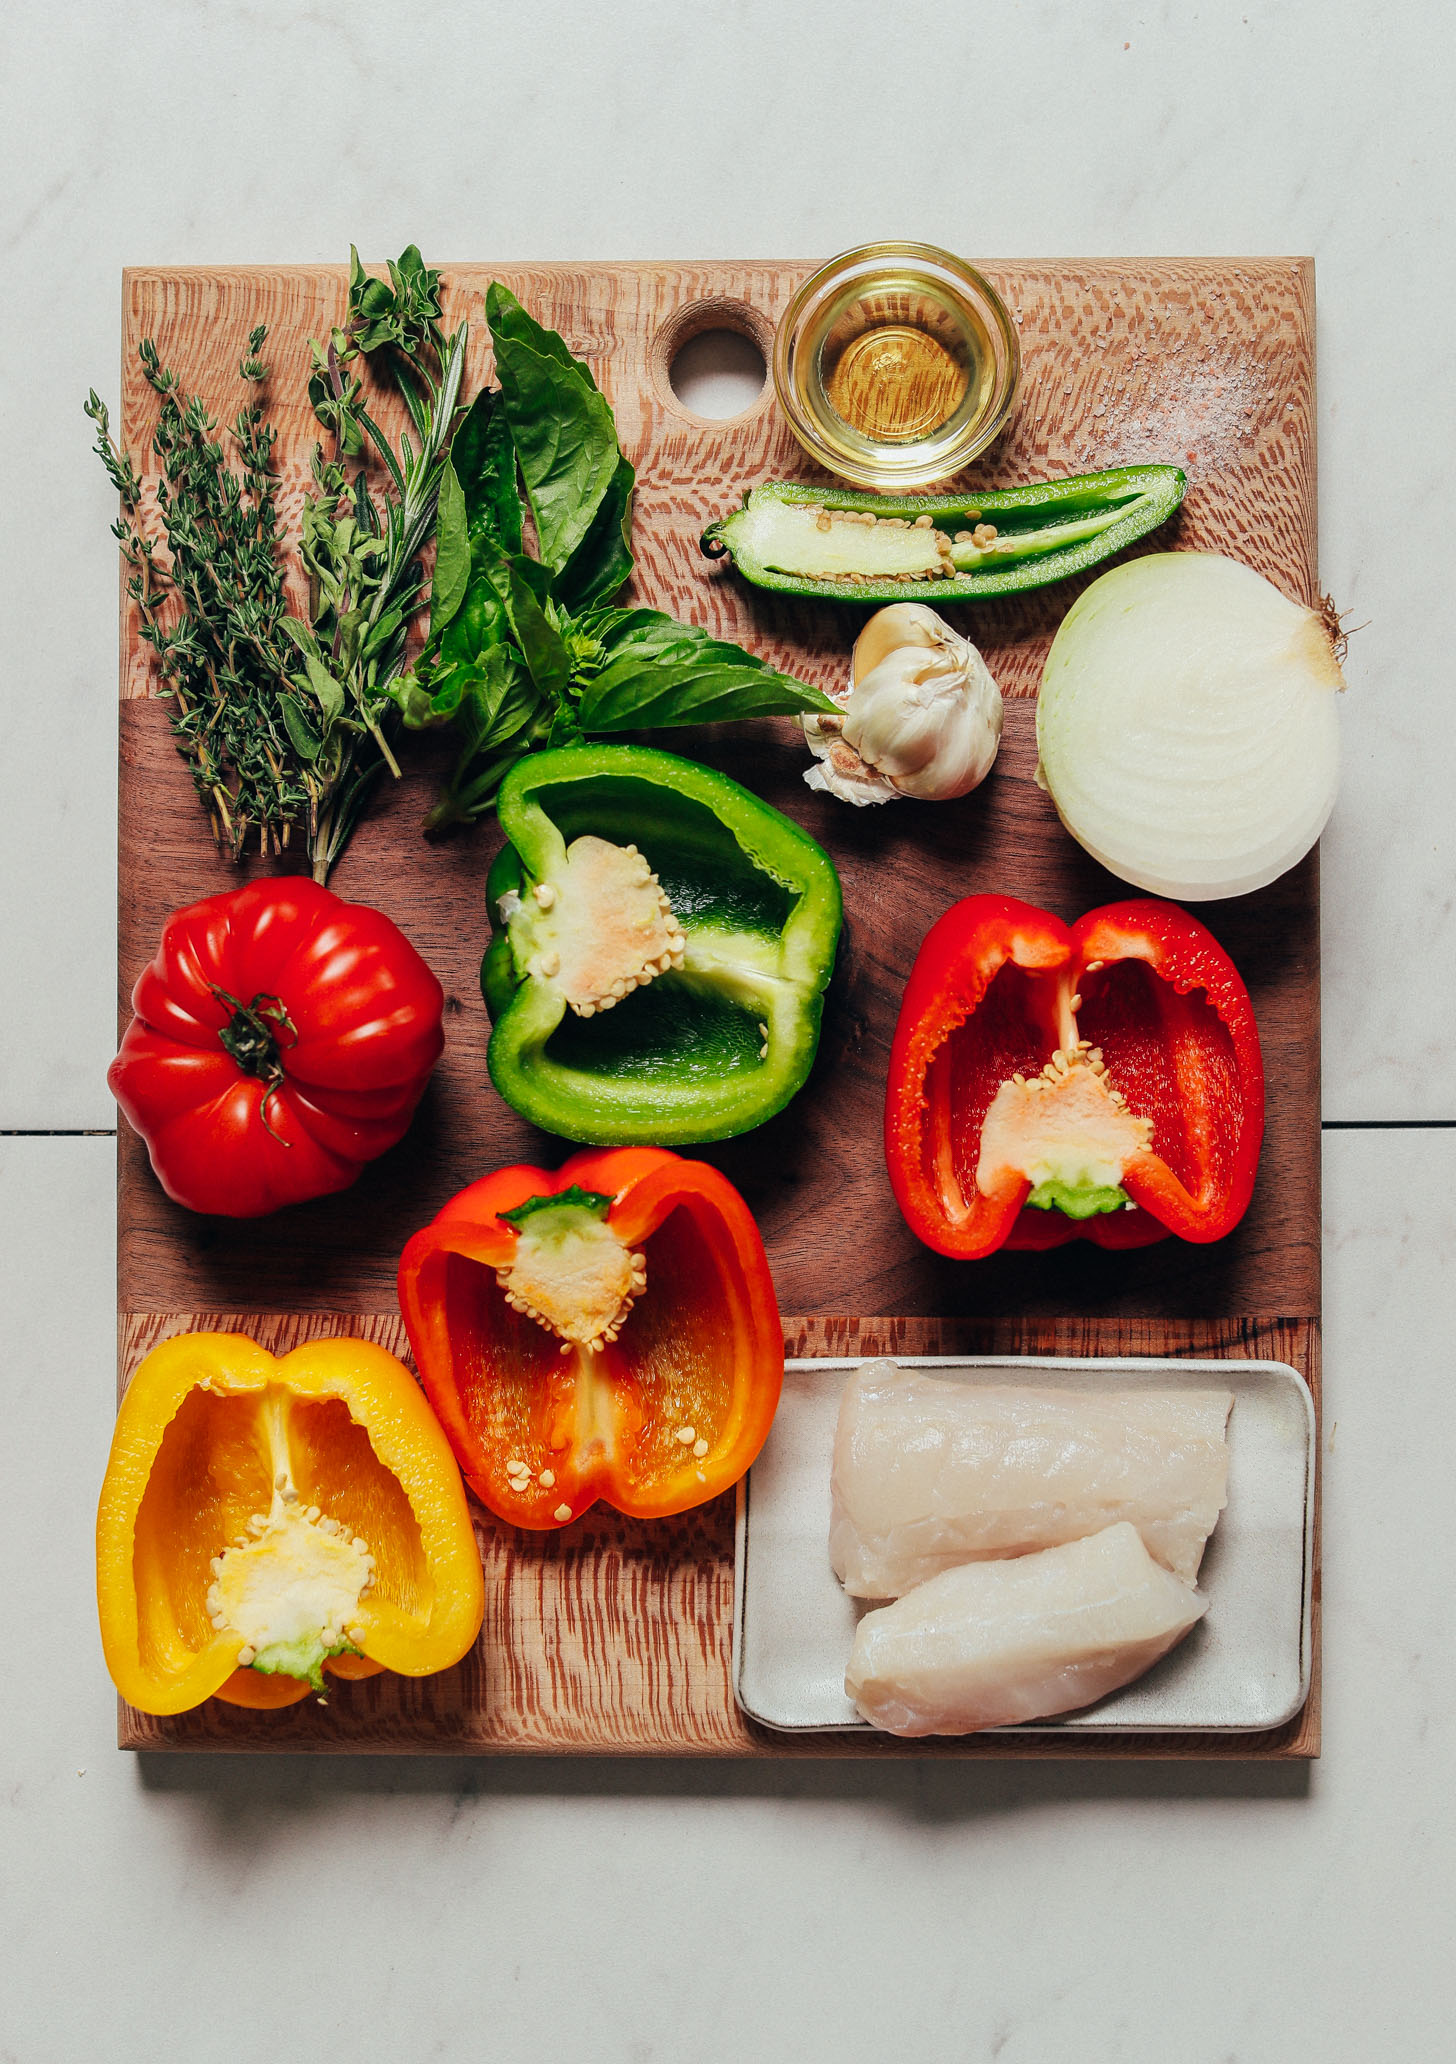 Wood cutting board with bell peppers, onion, fish, herbs, garlic, and other ingredients for making healthy Baked White Fish